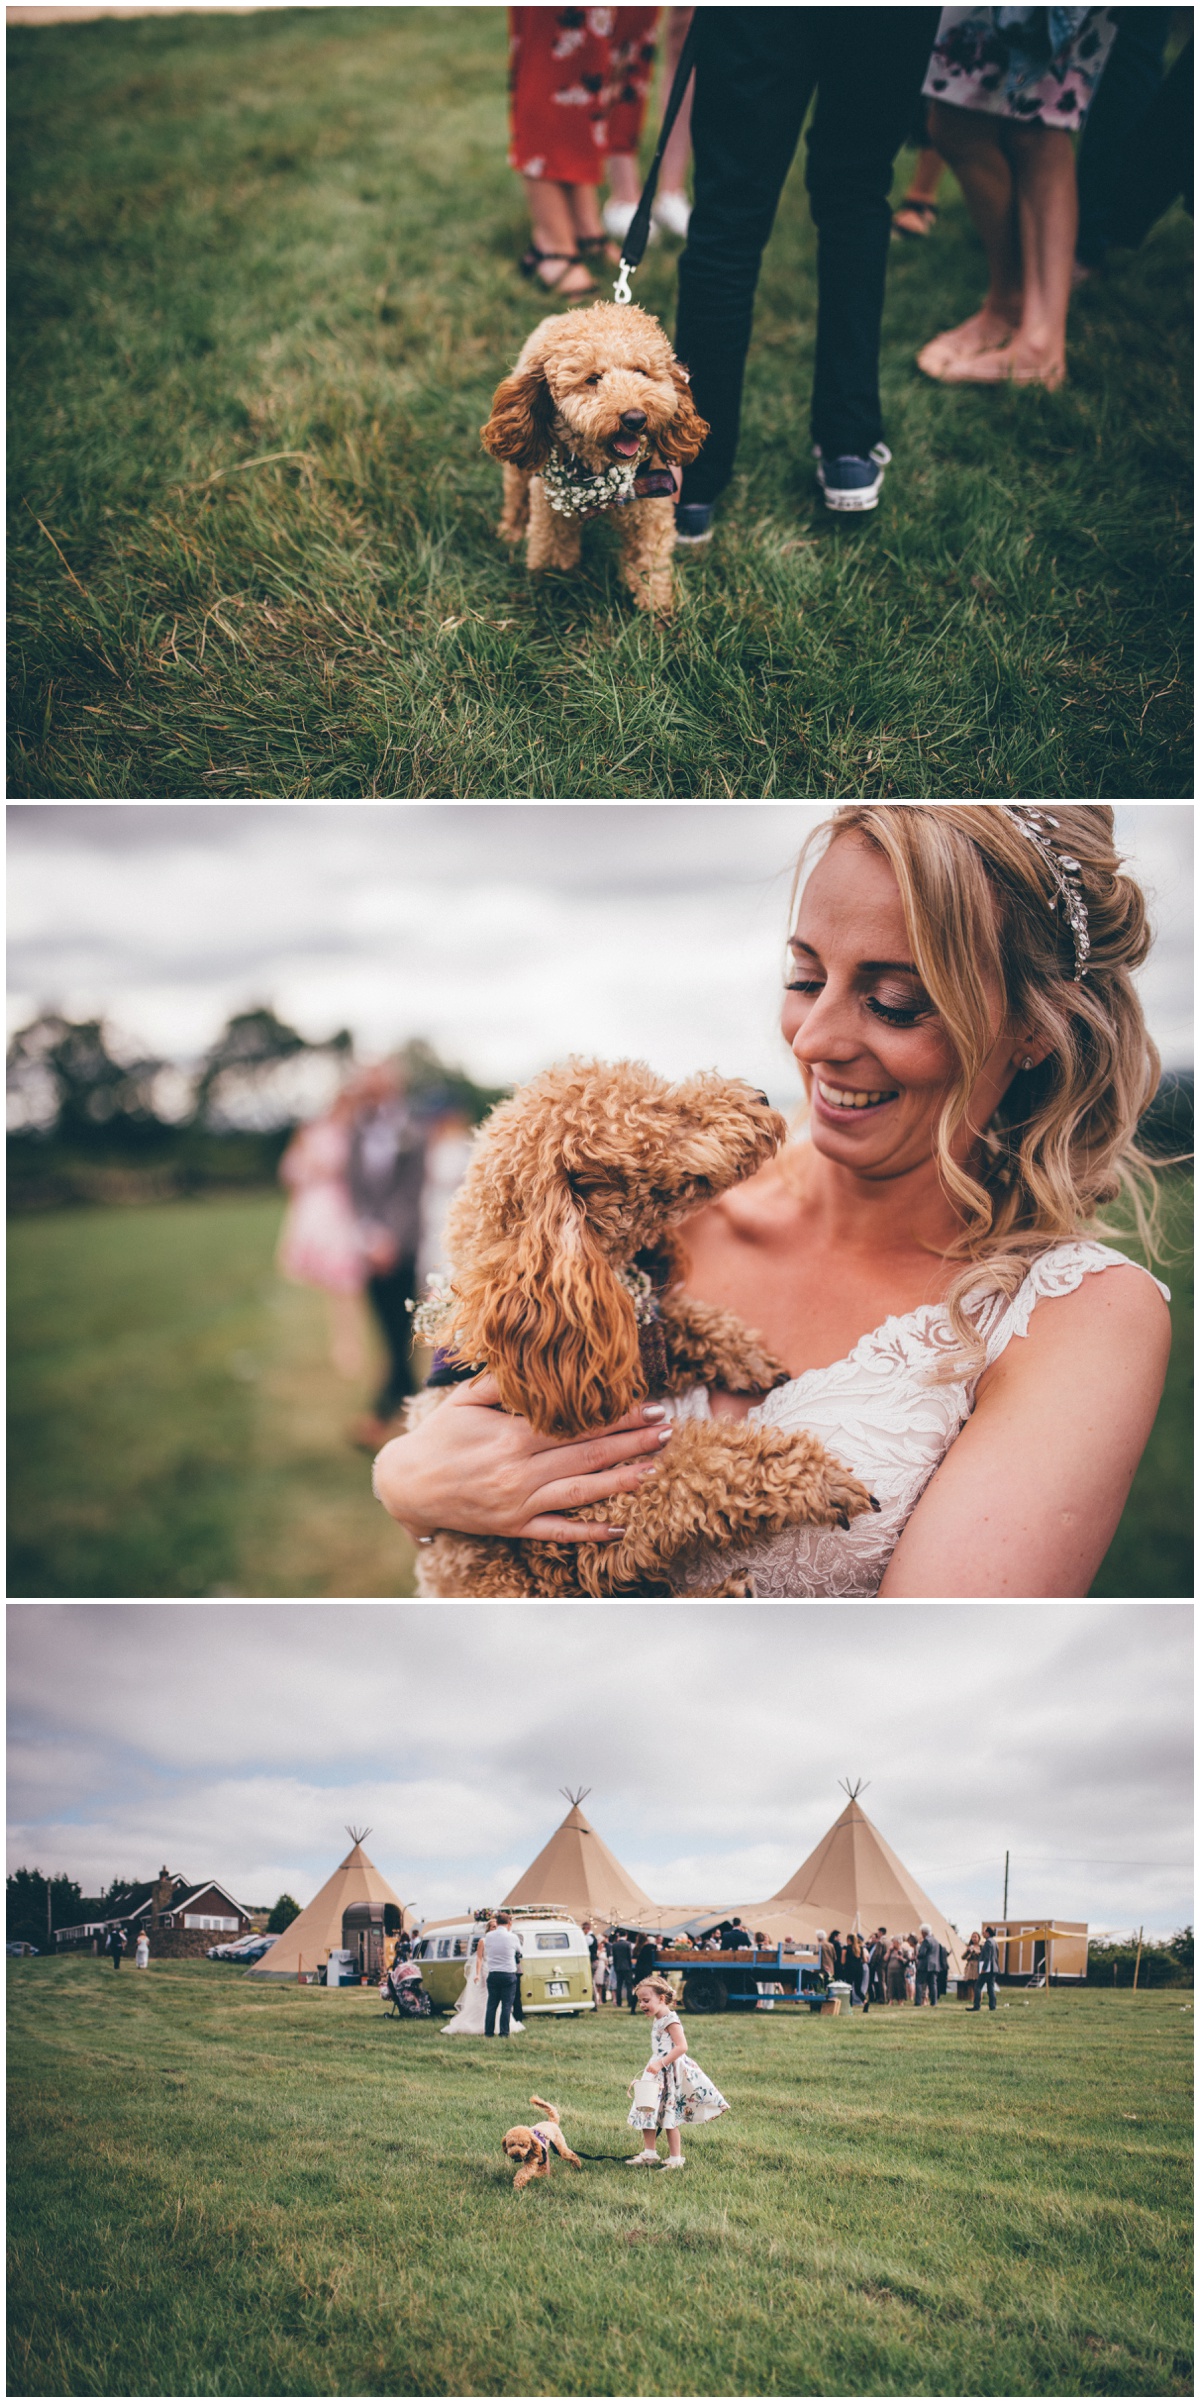 Tipi wedding in Staffordshire by Cheshire wedding photographer.